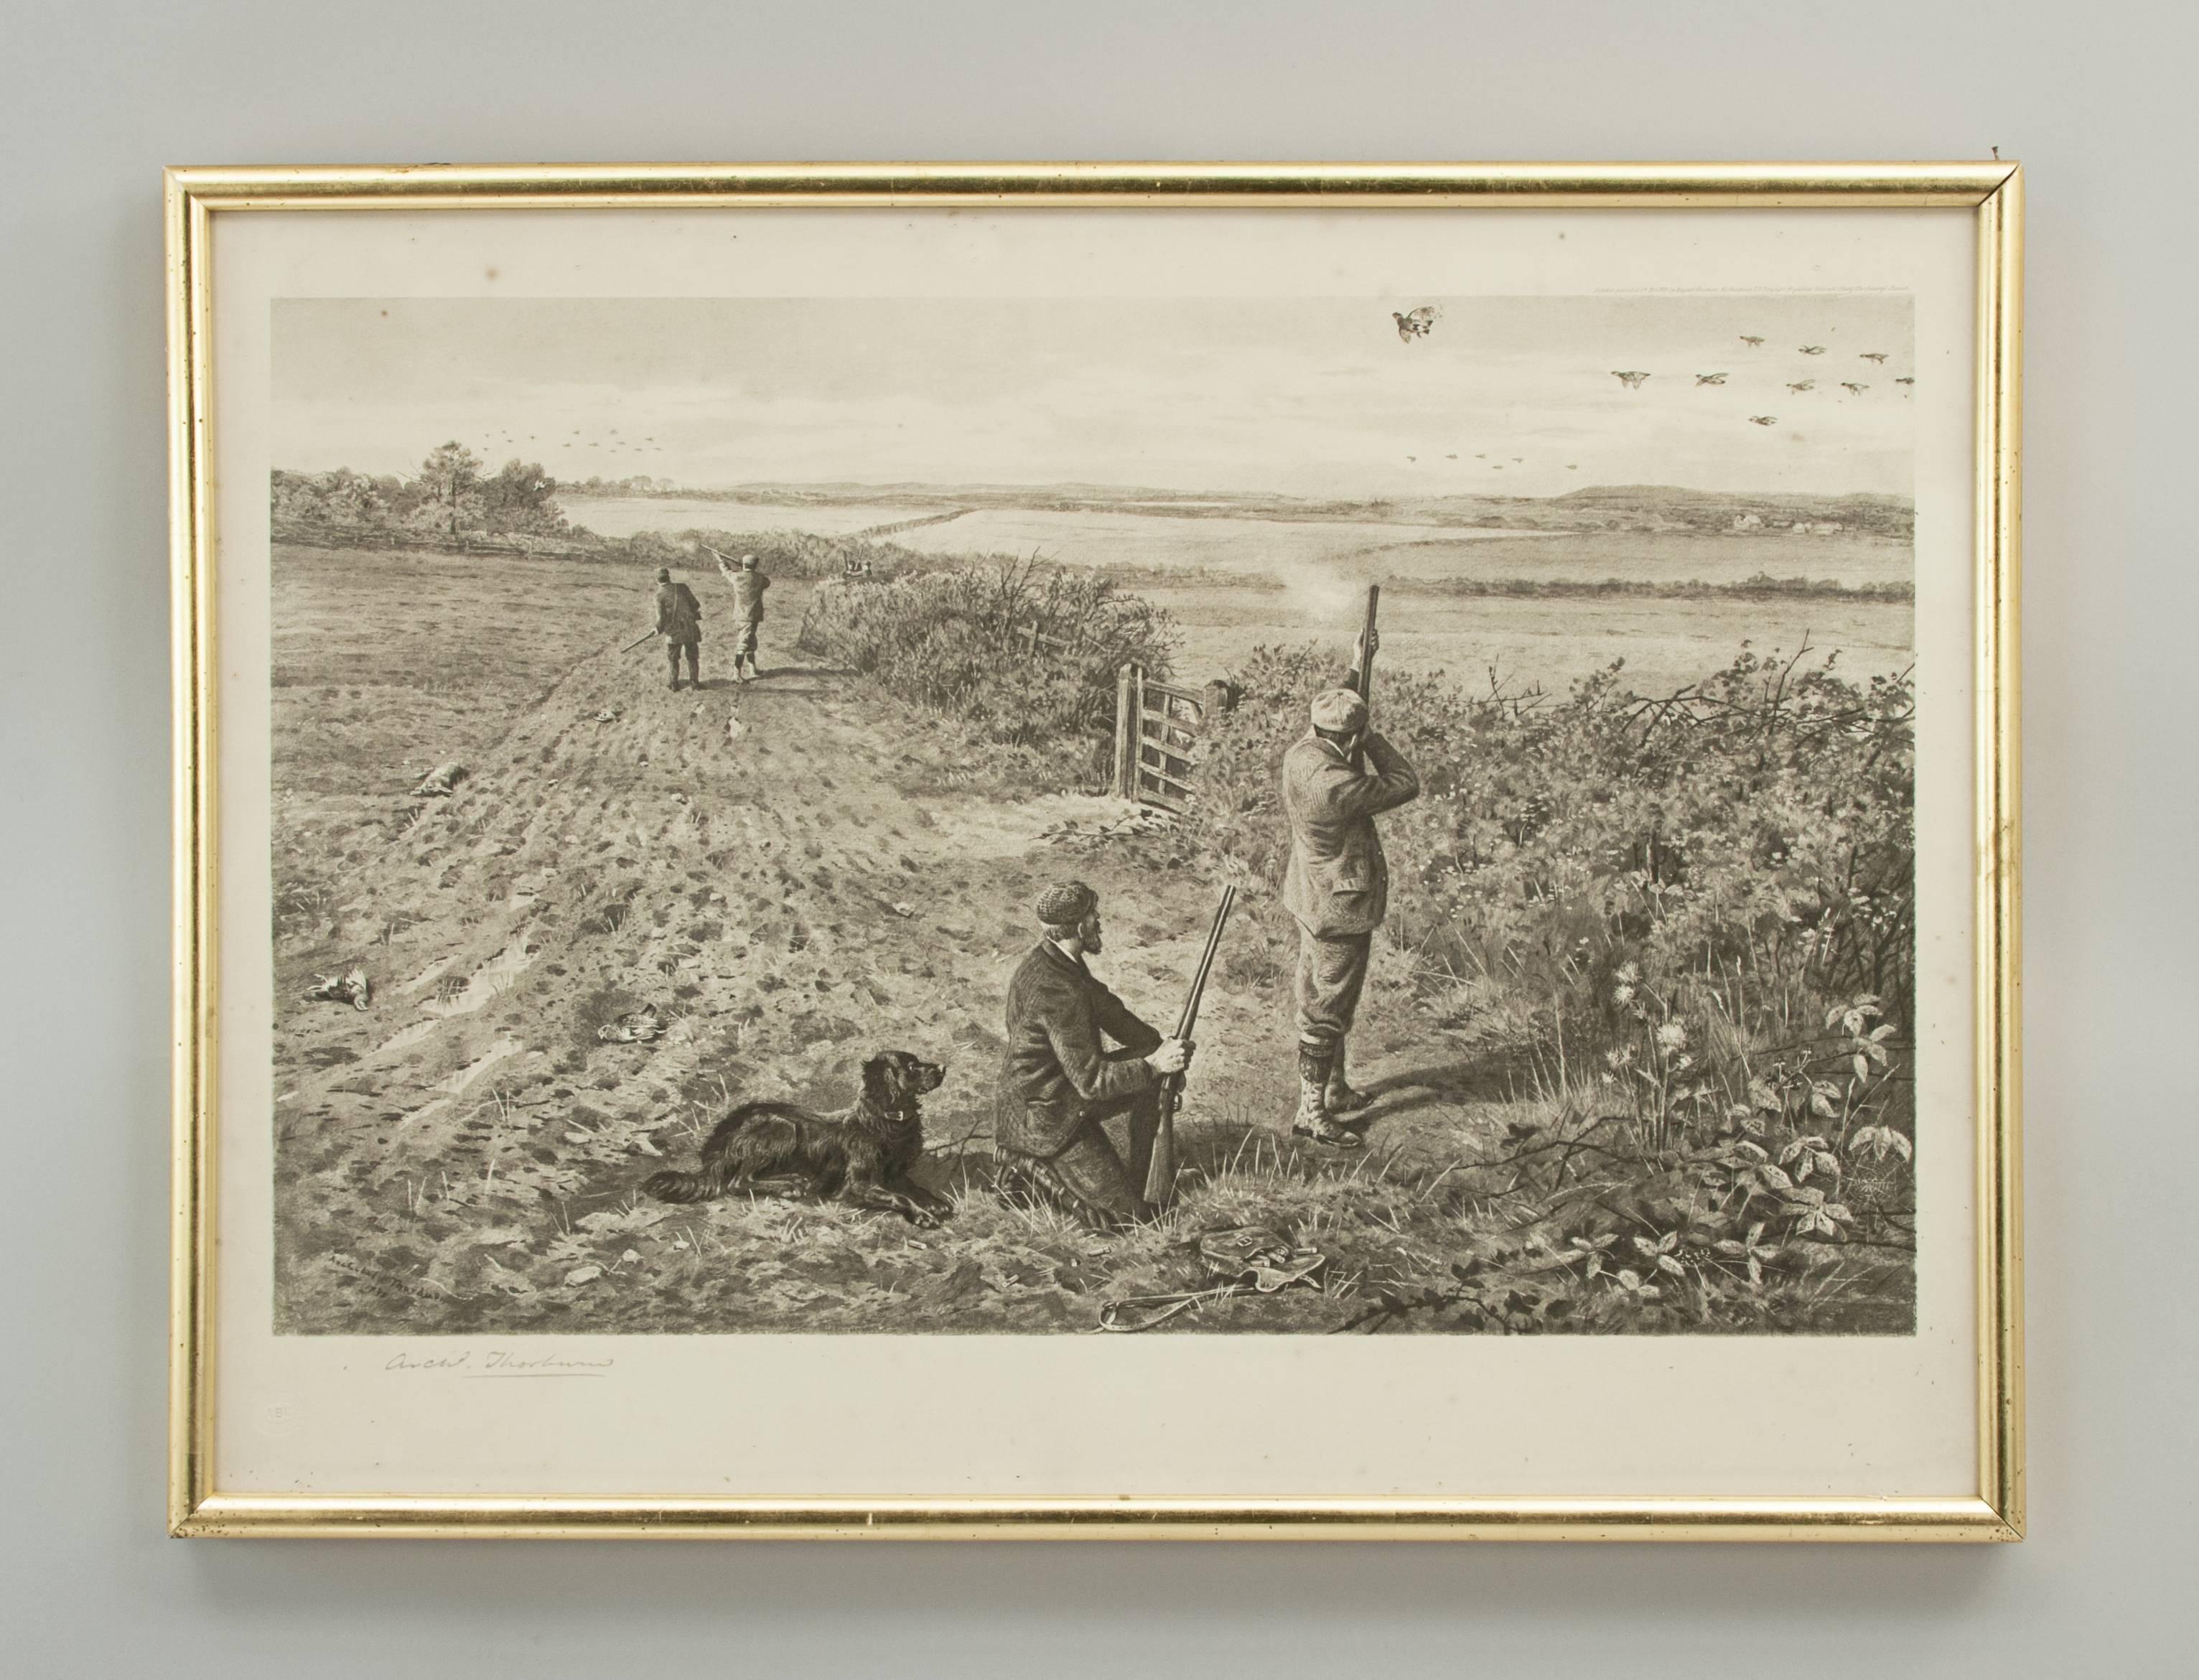 Partridge shooting picture by Archibald Thorburn.
A game bird photogravure titled 'Coming Over The Guns (Partridge Driving)' by Archibald Thorburn. The partridge shooting picture is signed in pencil by the artist and has been reframed at some time,